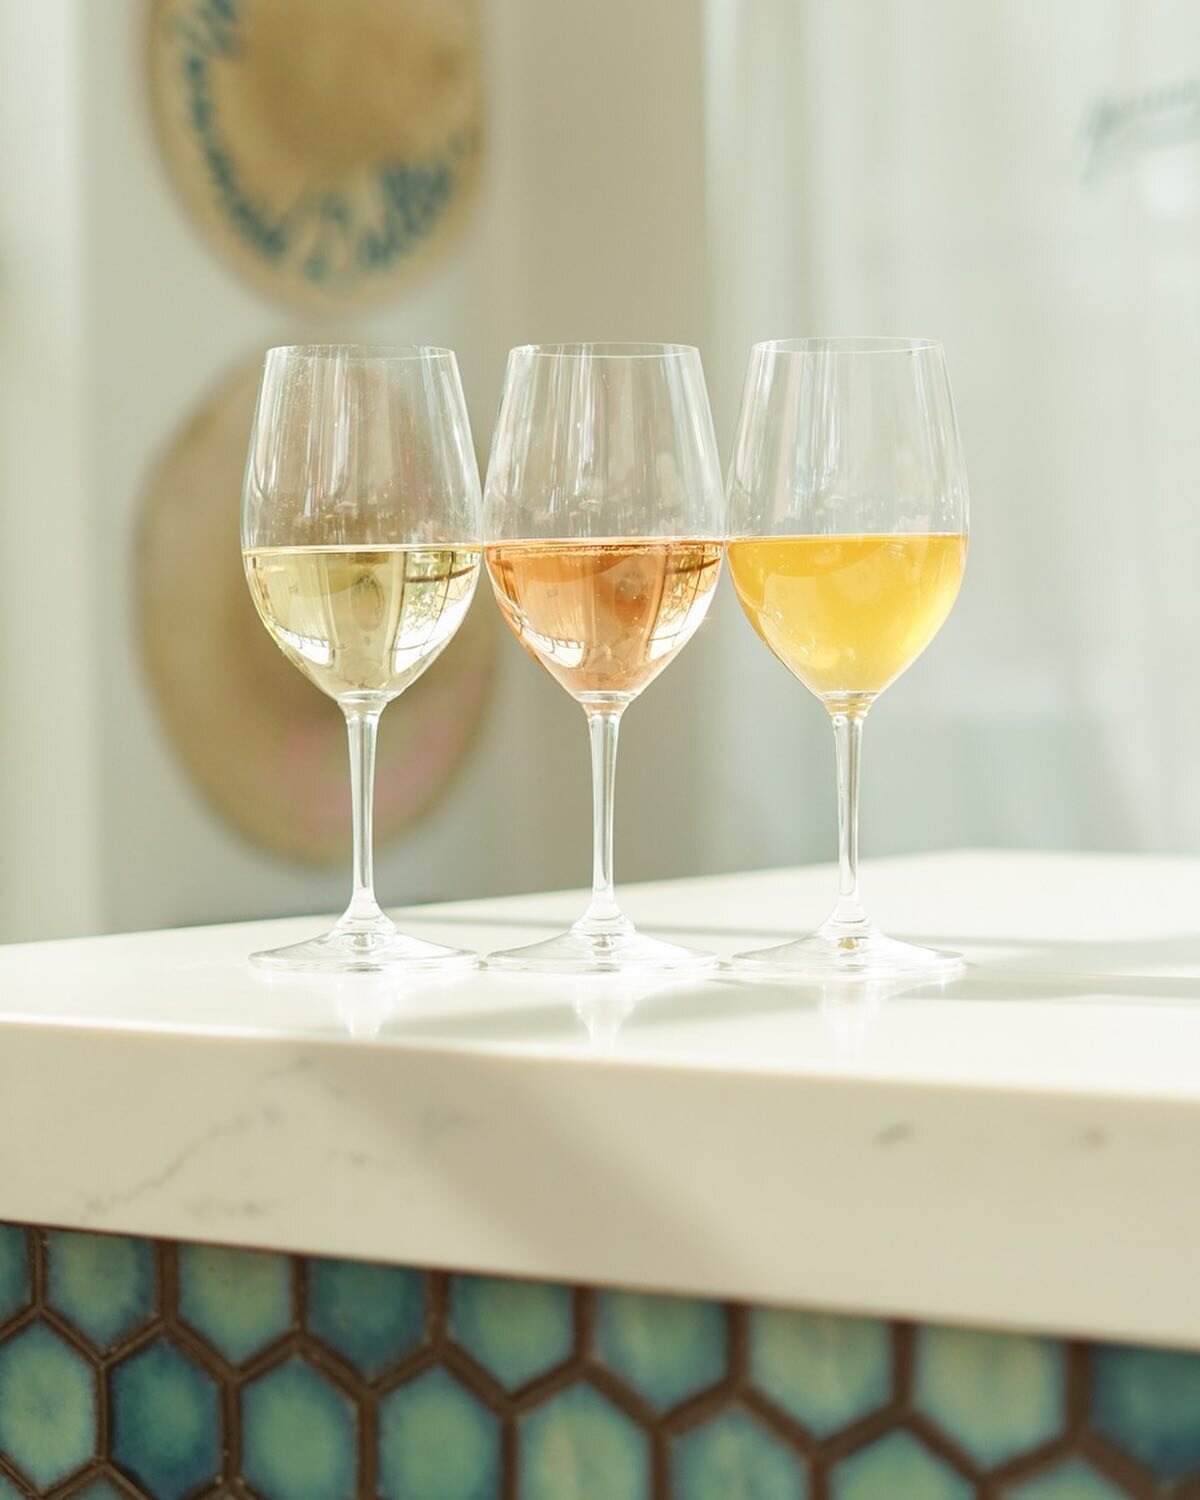 Enjoy a nice crisp wine on our Mermaid Bar patio this weekend. Our white wine, Ros&eacute;, and orange wine selection are a perfect pairing with this patio weather ☀️